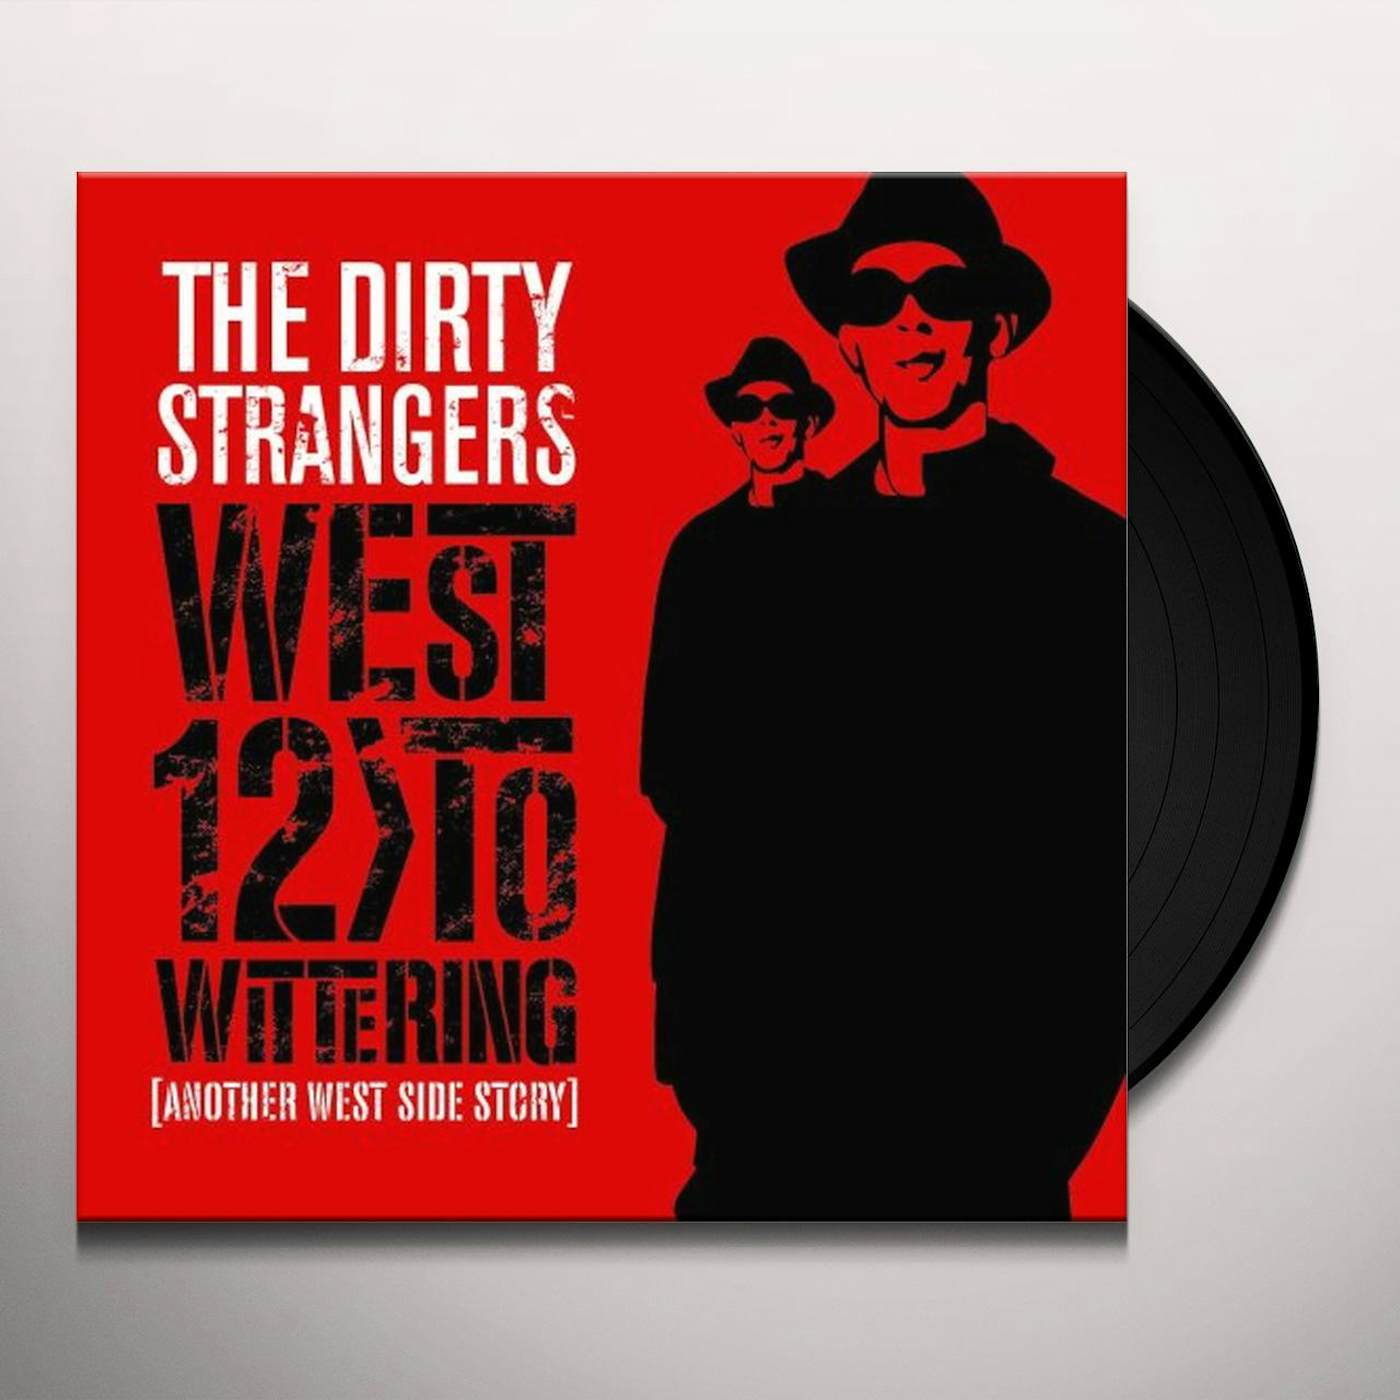 The Dirty Strangers WEST TO WITTERING ANOTHER WEST SIDE STORY Vinyl Record